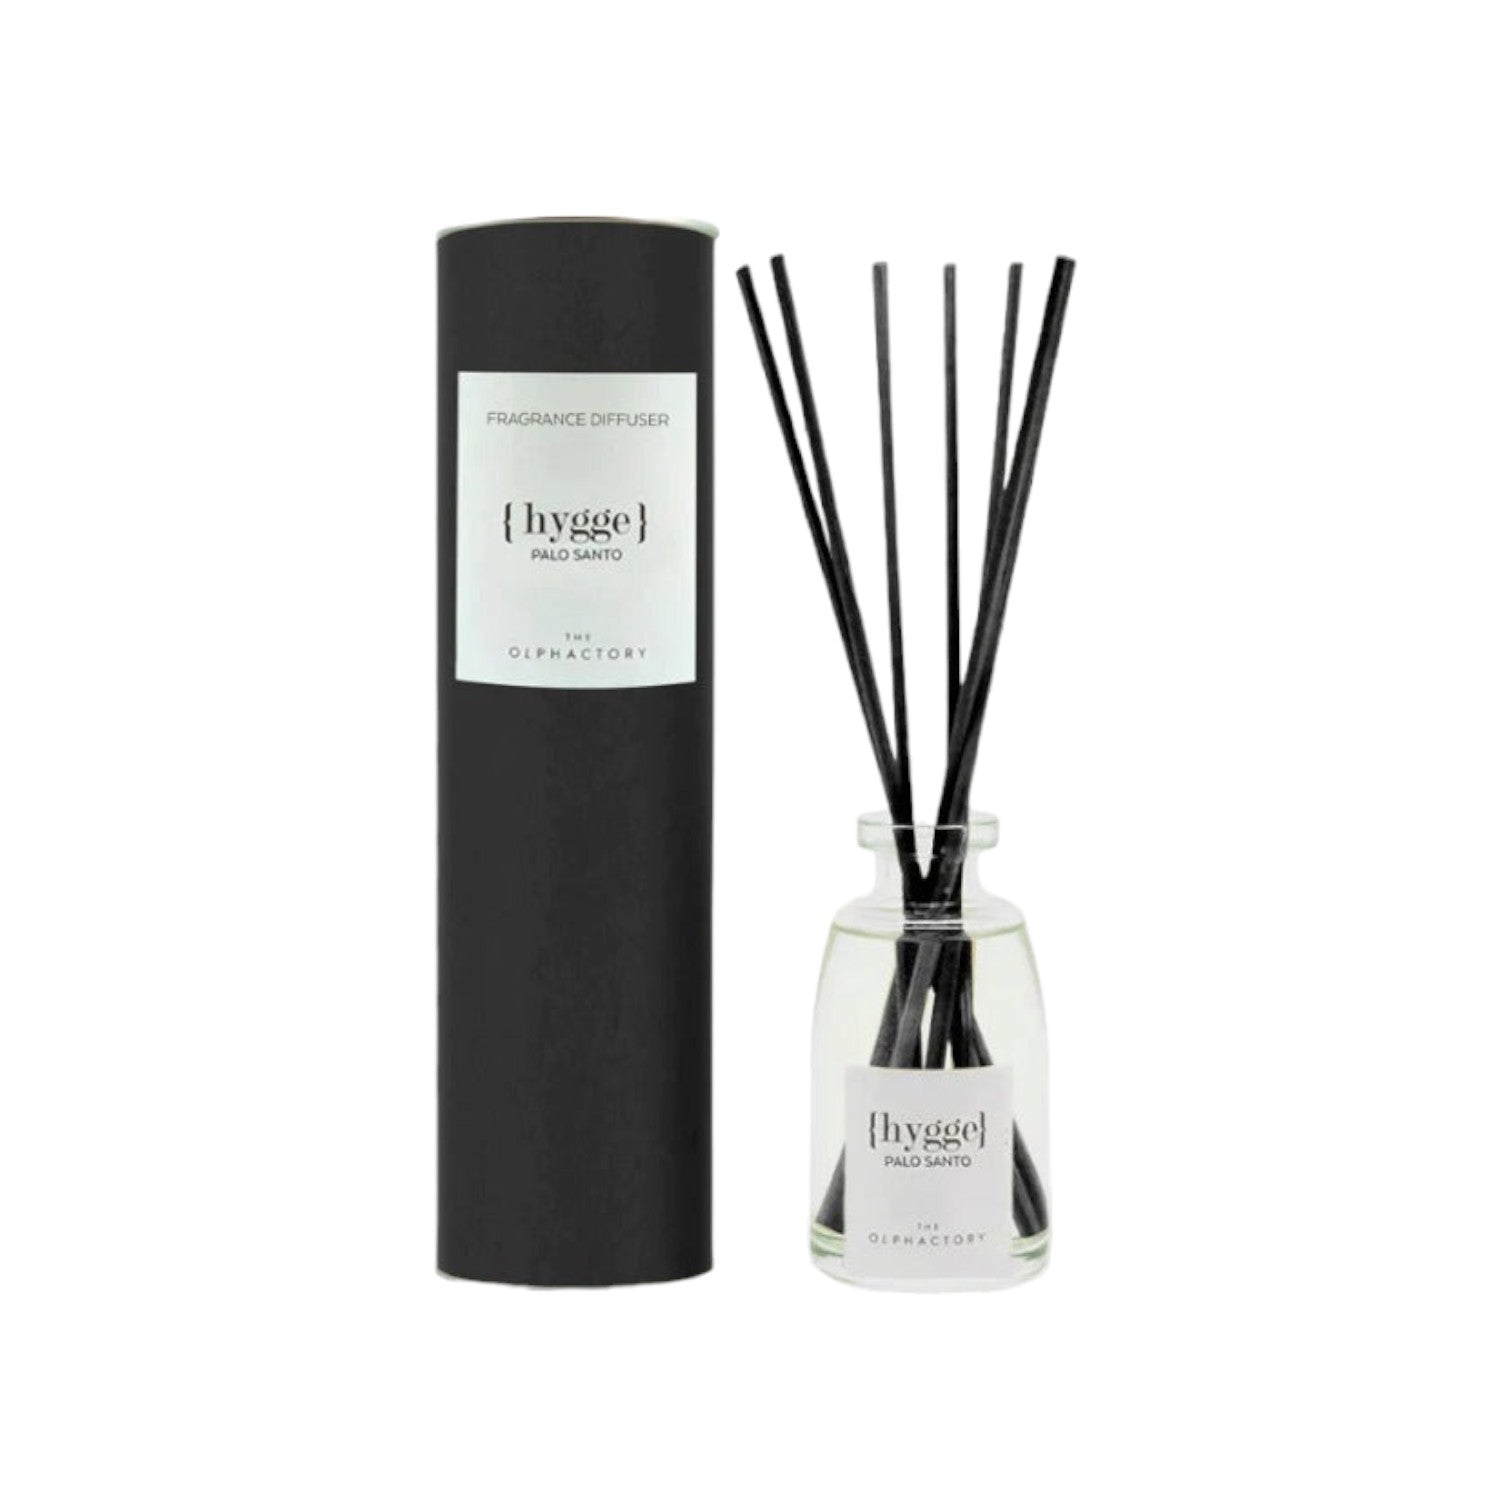 The Olphactory - Geurdiffuser 'Hygge' - 100ml